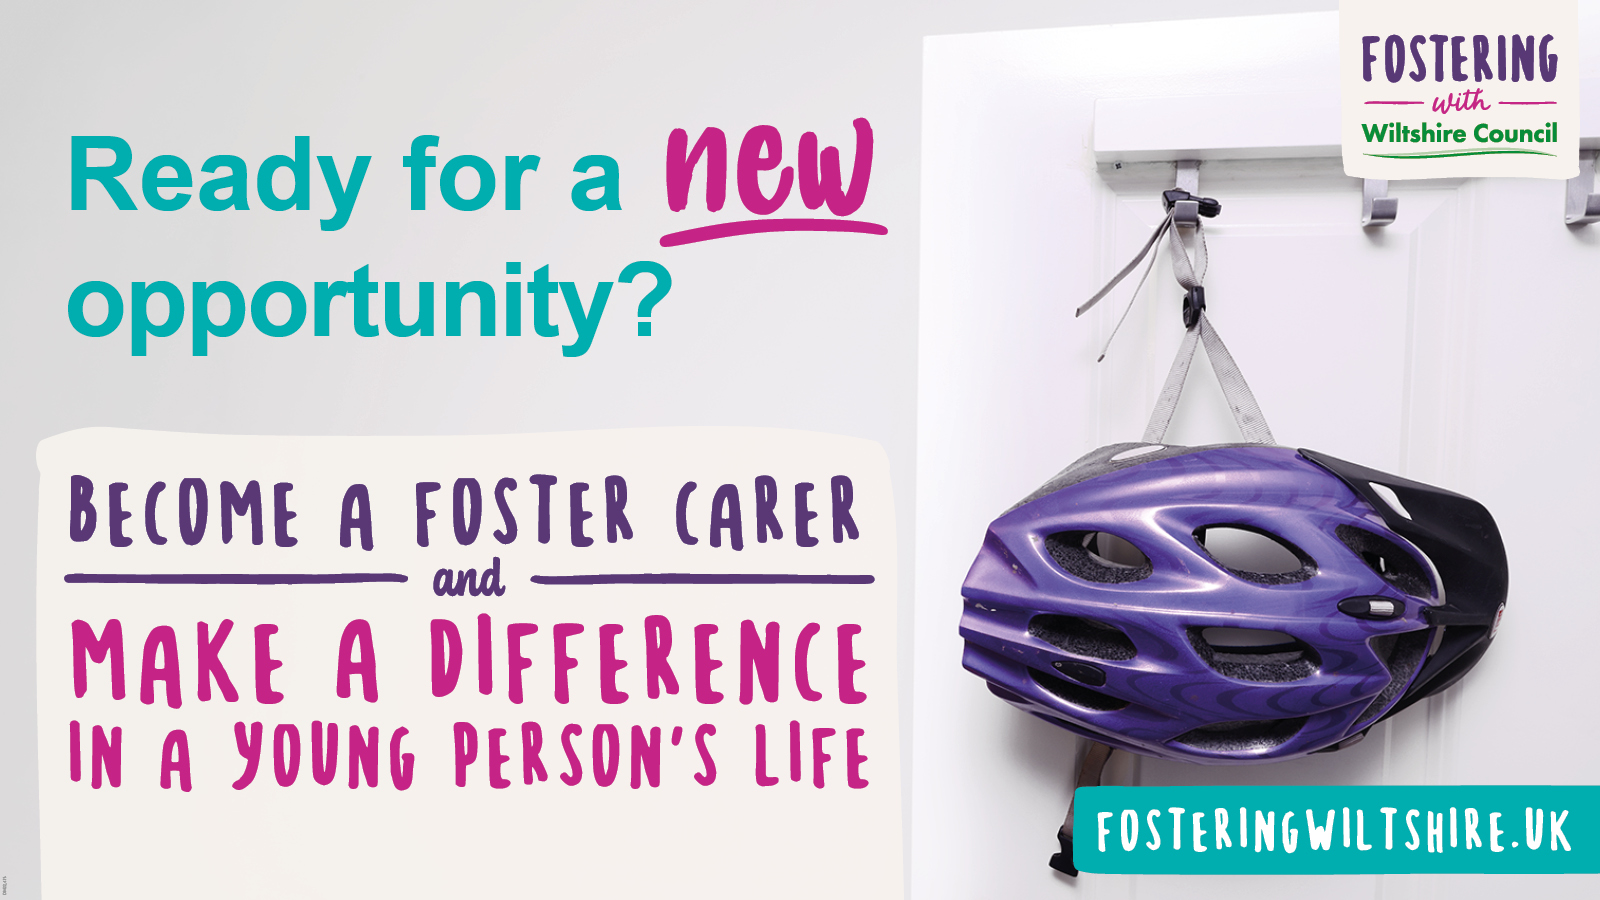 Fostering with Wiltshire Council - Q&A Session